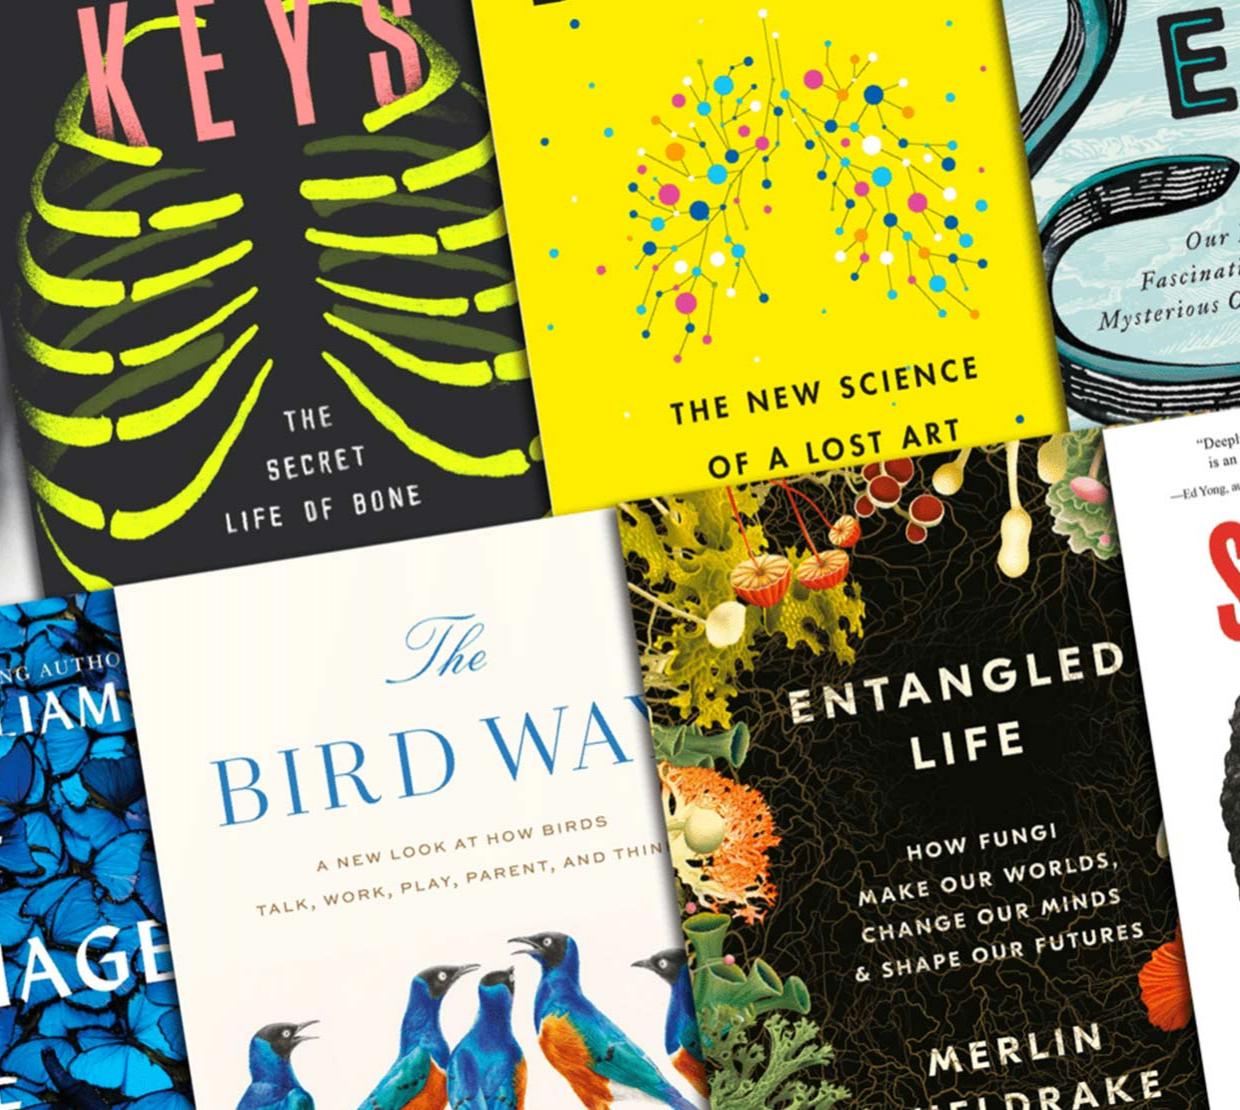 Science-themed novels lined up in an angled grid